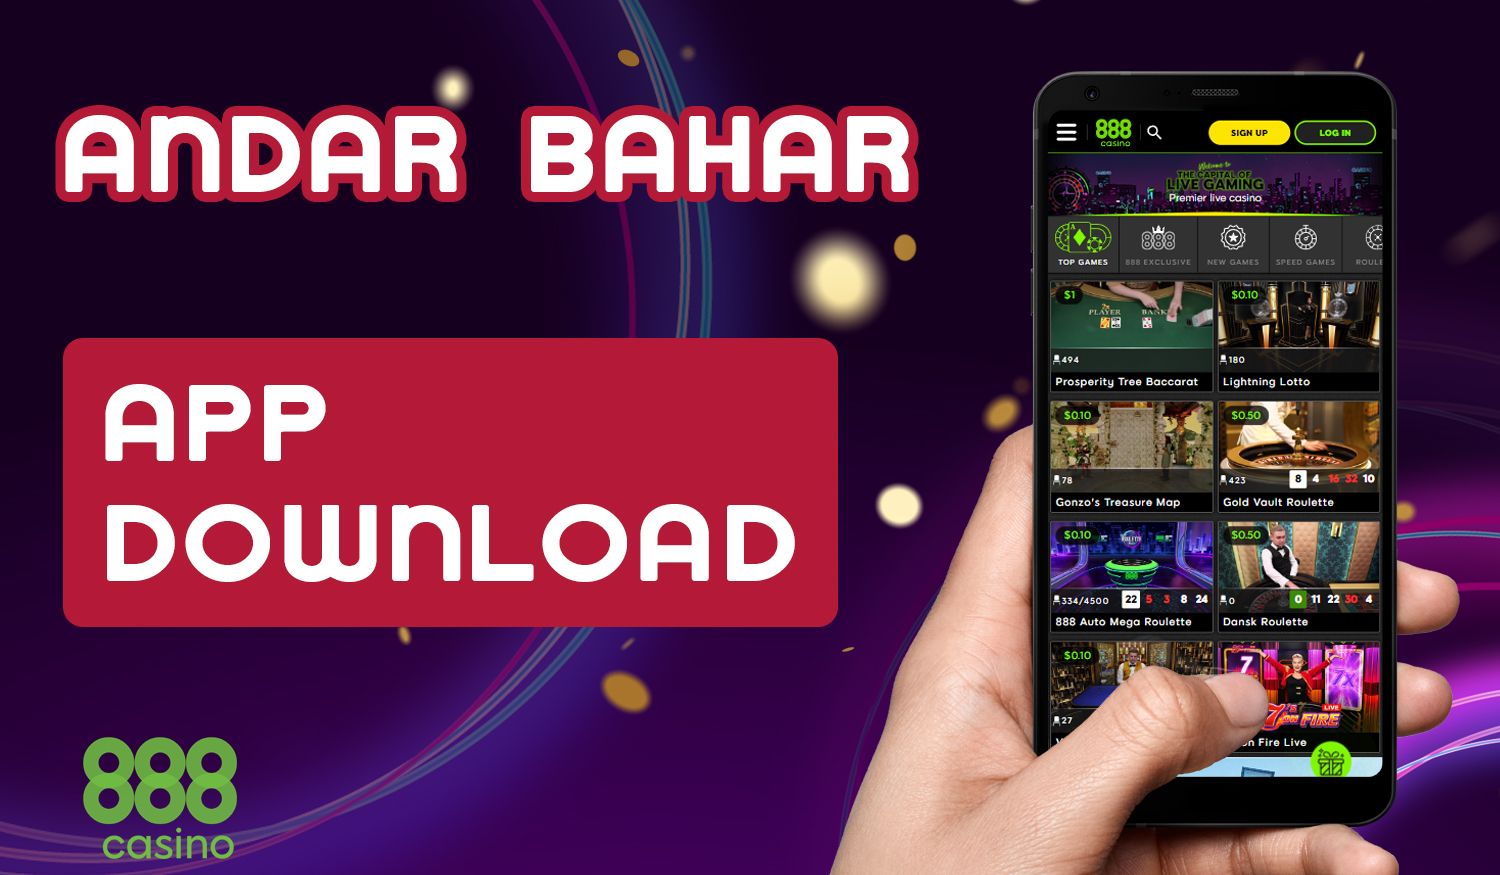 How to download and install 888 casino mobile app on android and iOS